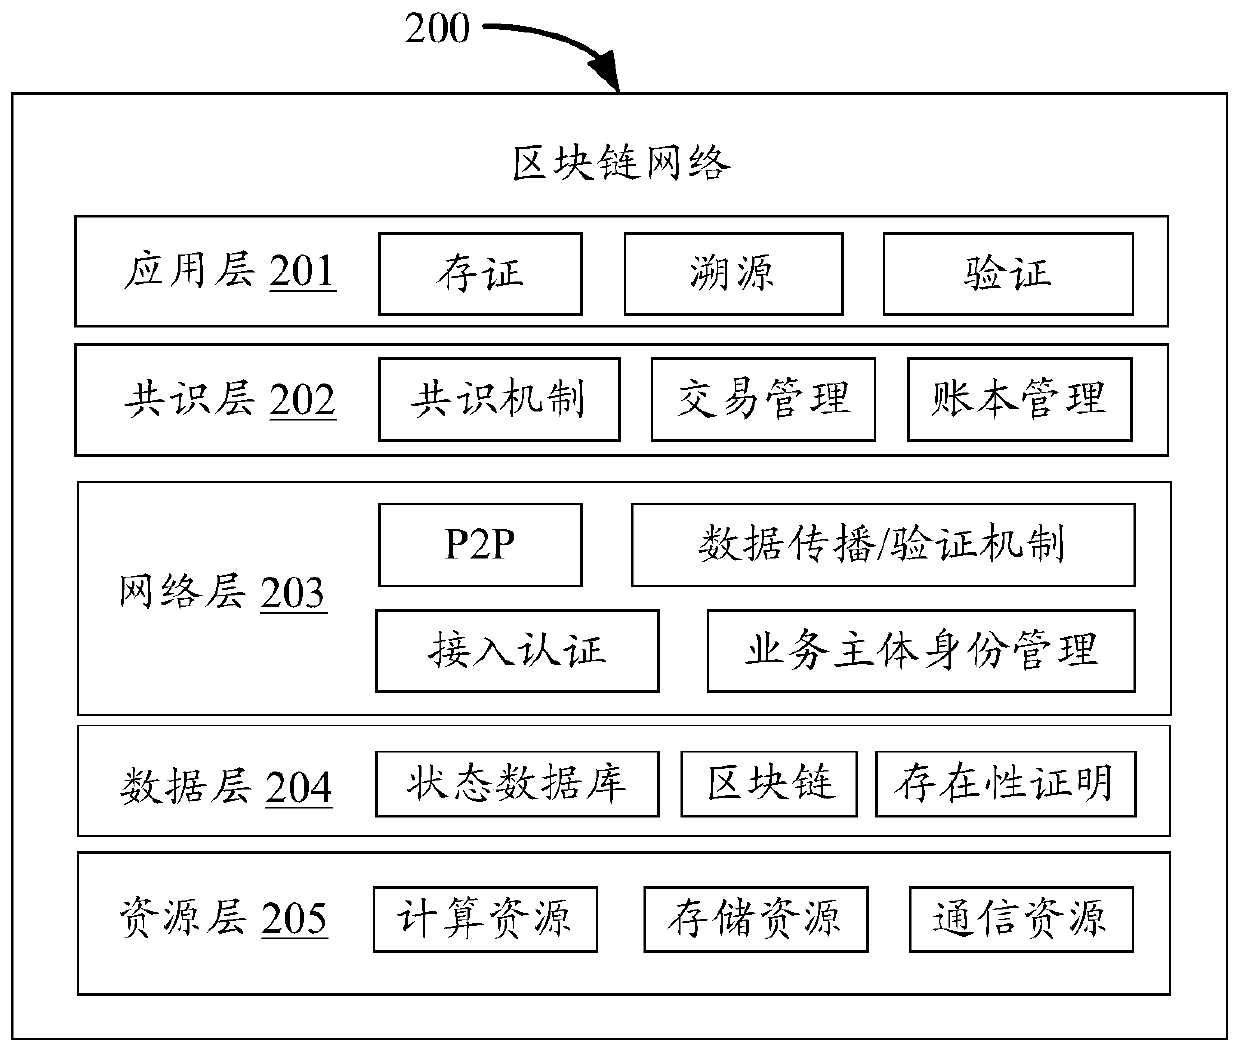 Virtual asset processing method and device based on block chain network